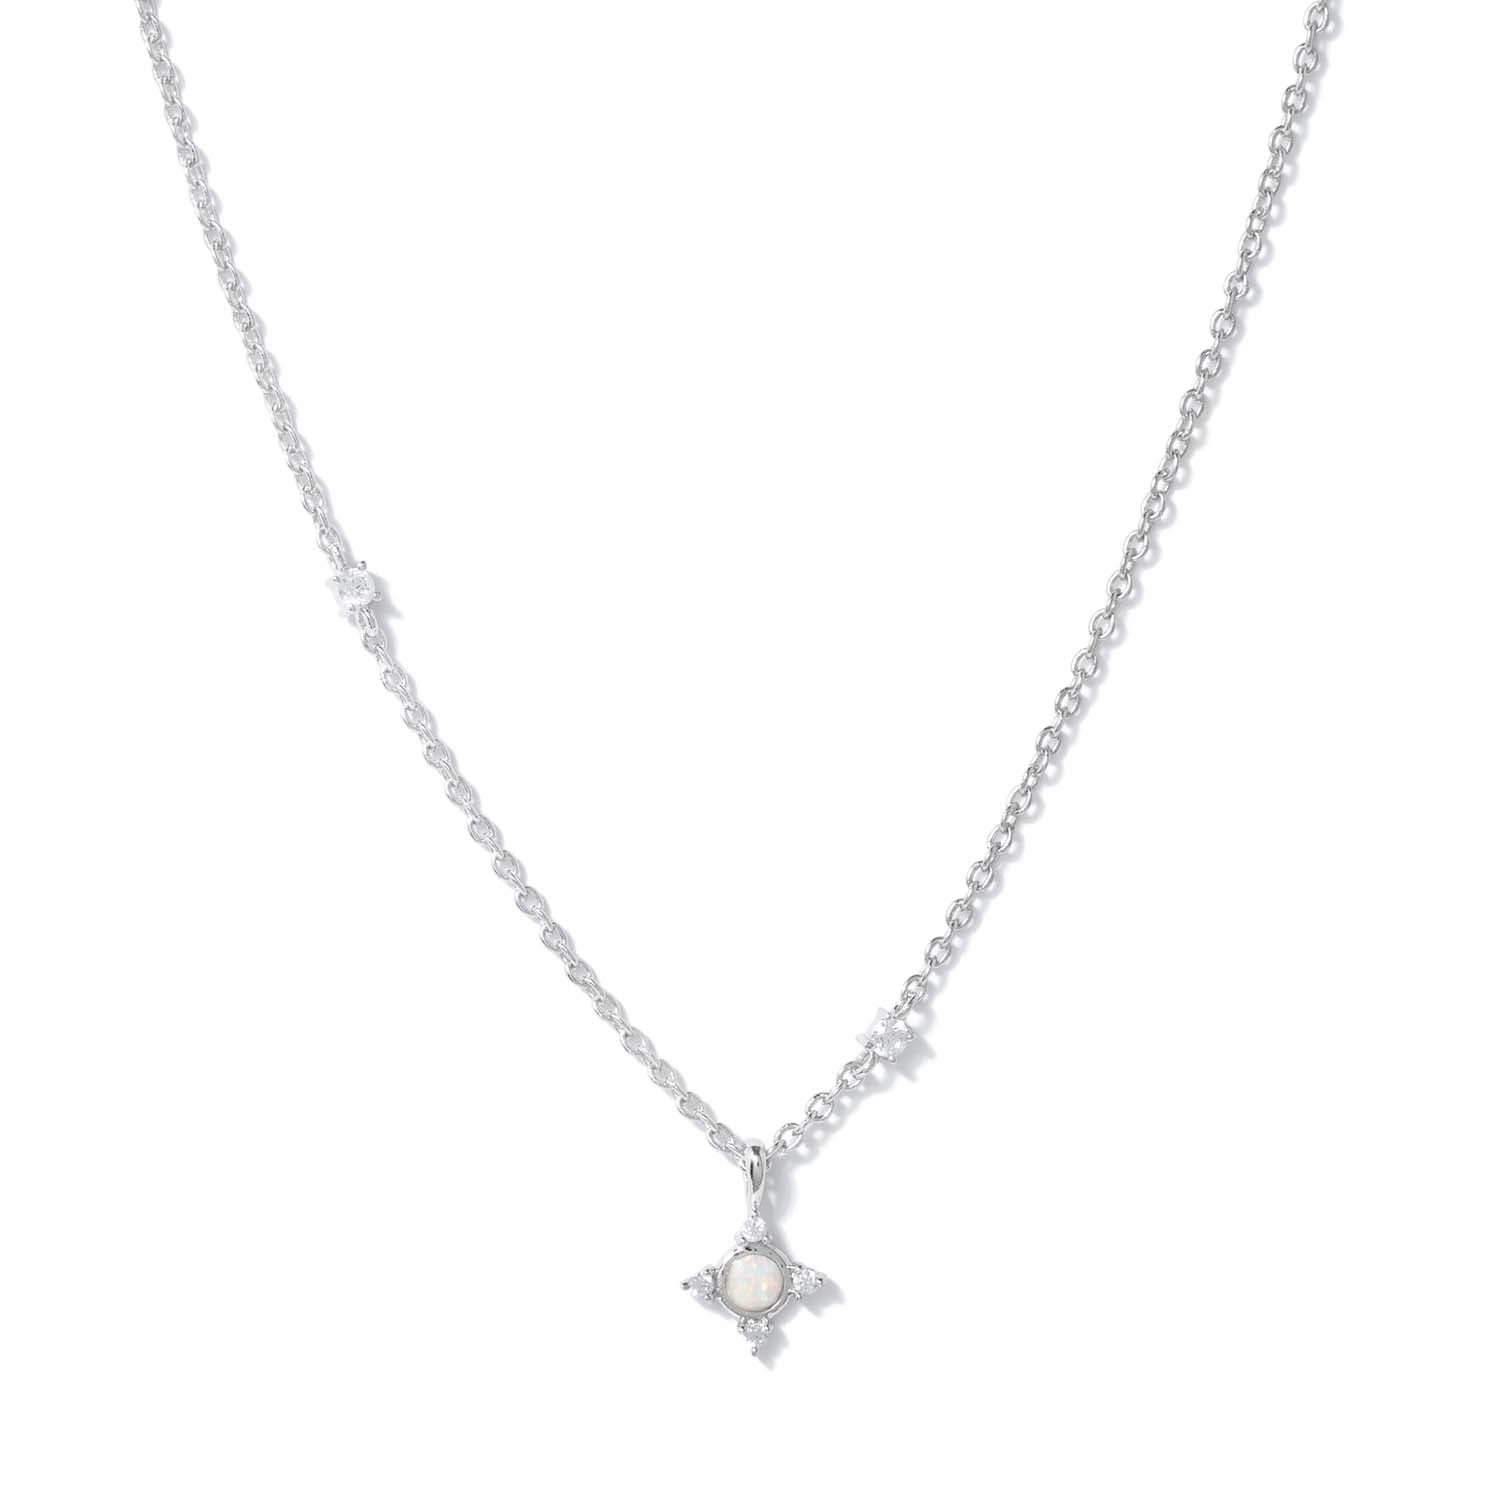 Elegant and minimalist necklace. 925 silver pendant necklace set with opals and cubic zirconia stones.